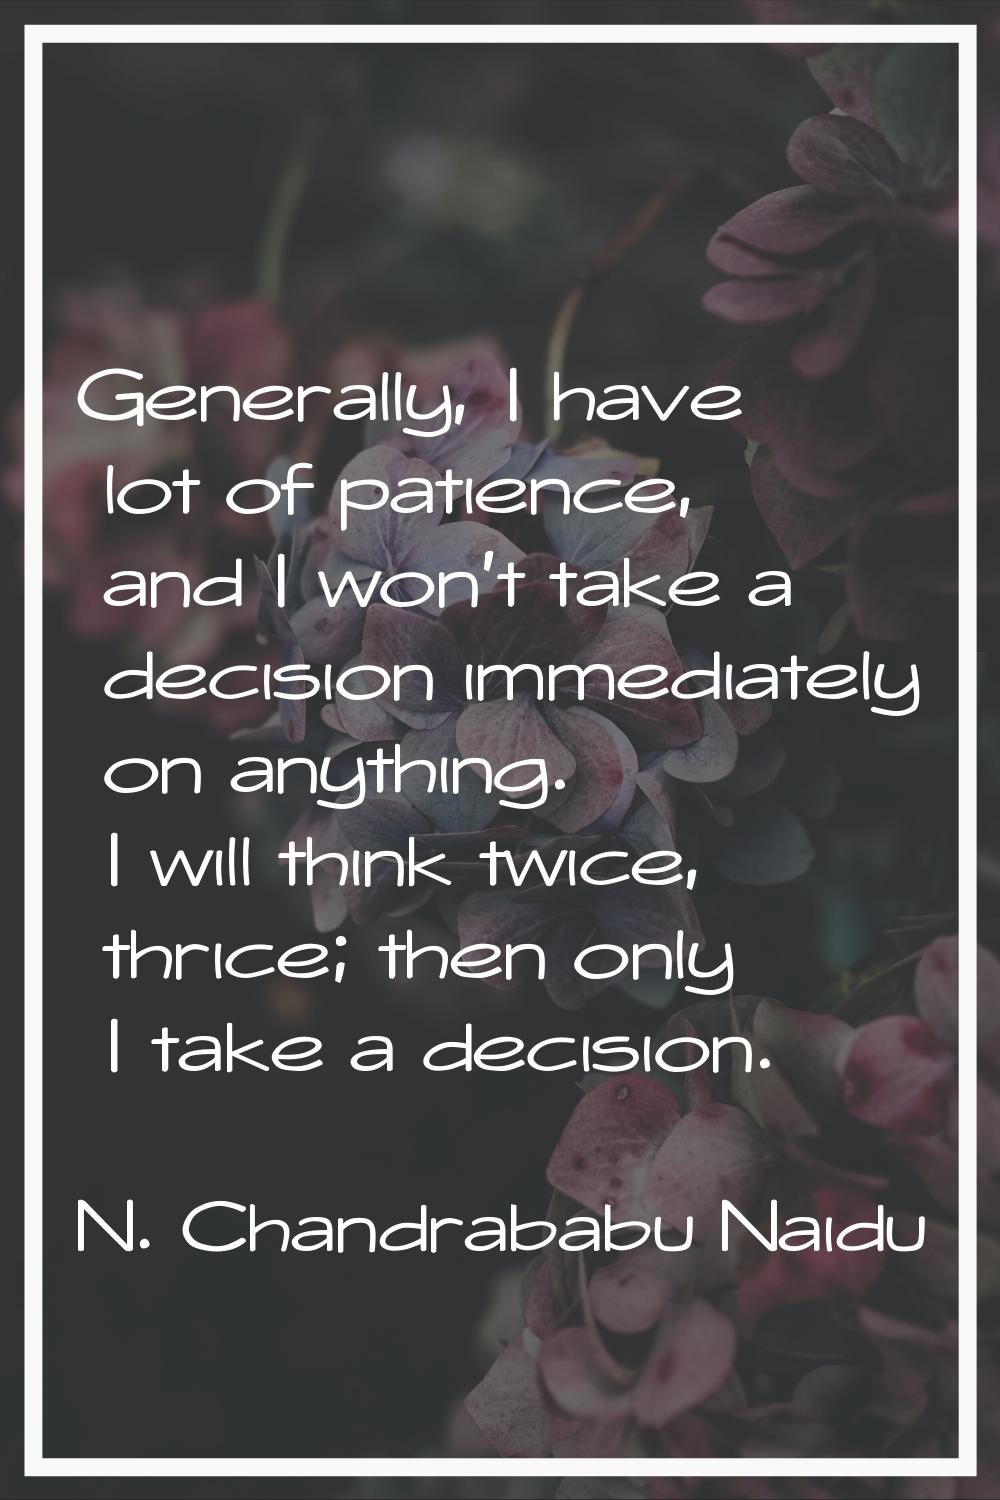 Generally, I have lot of patience, and I won't take a decision immediately on anything. I will thin